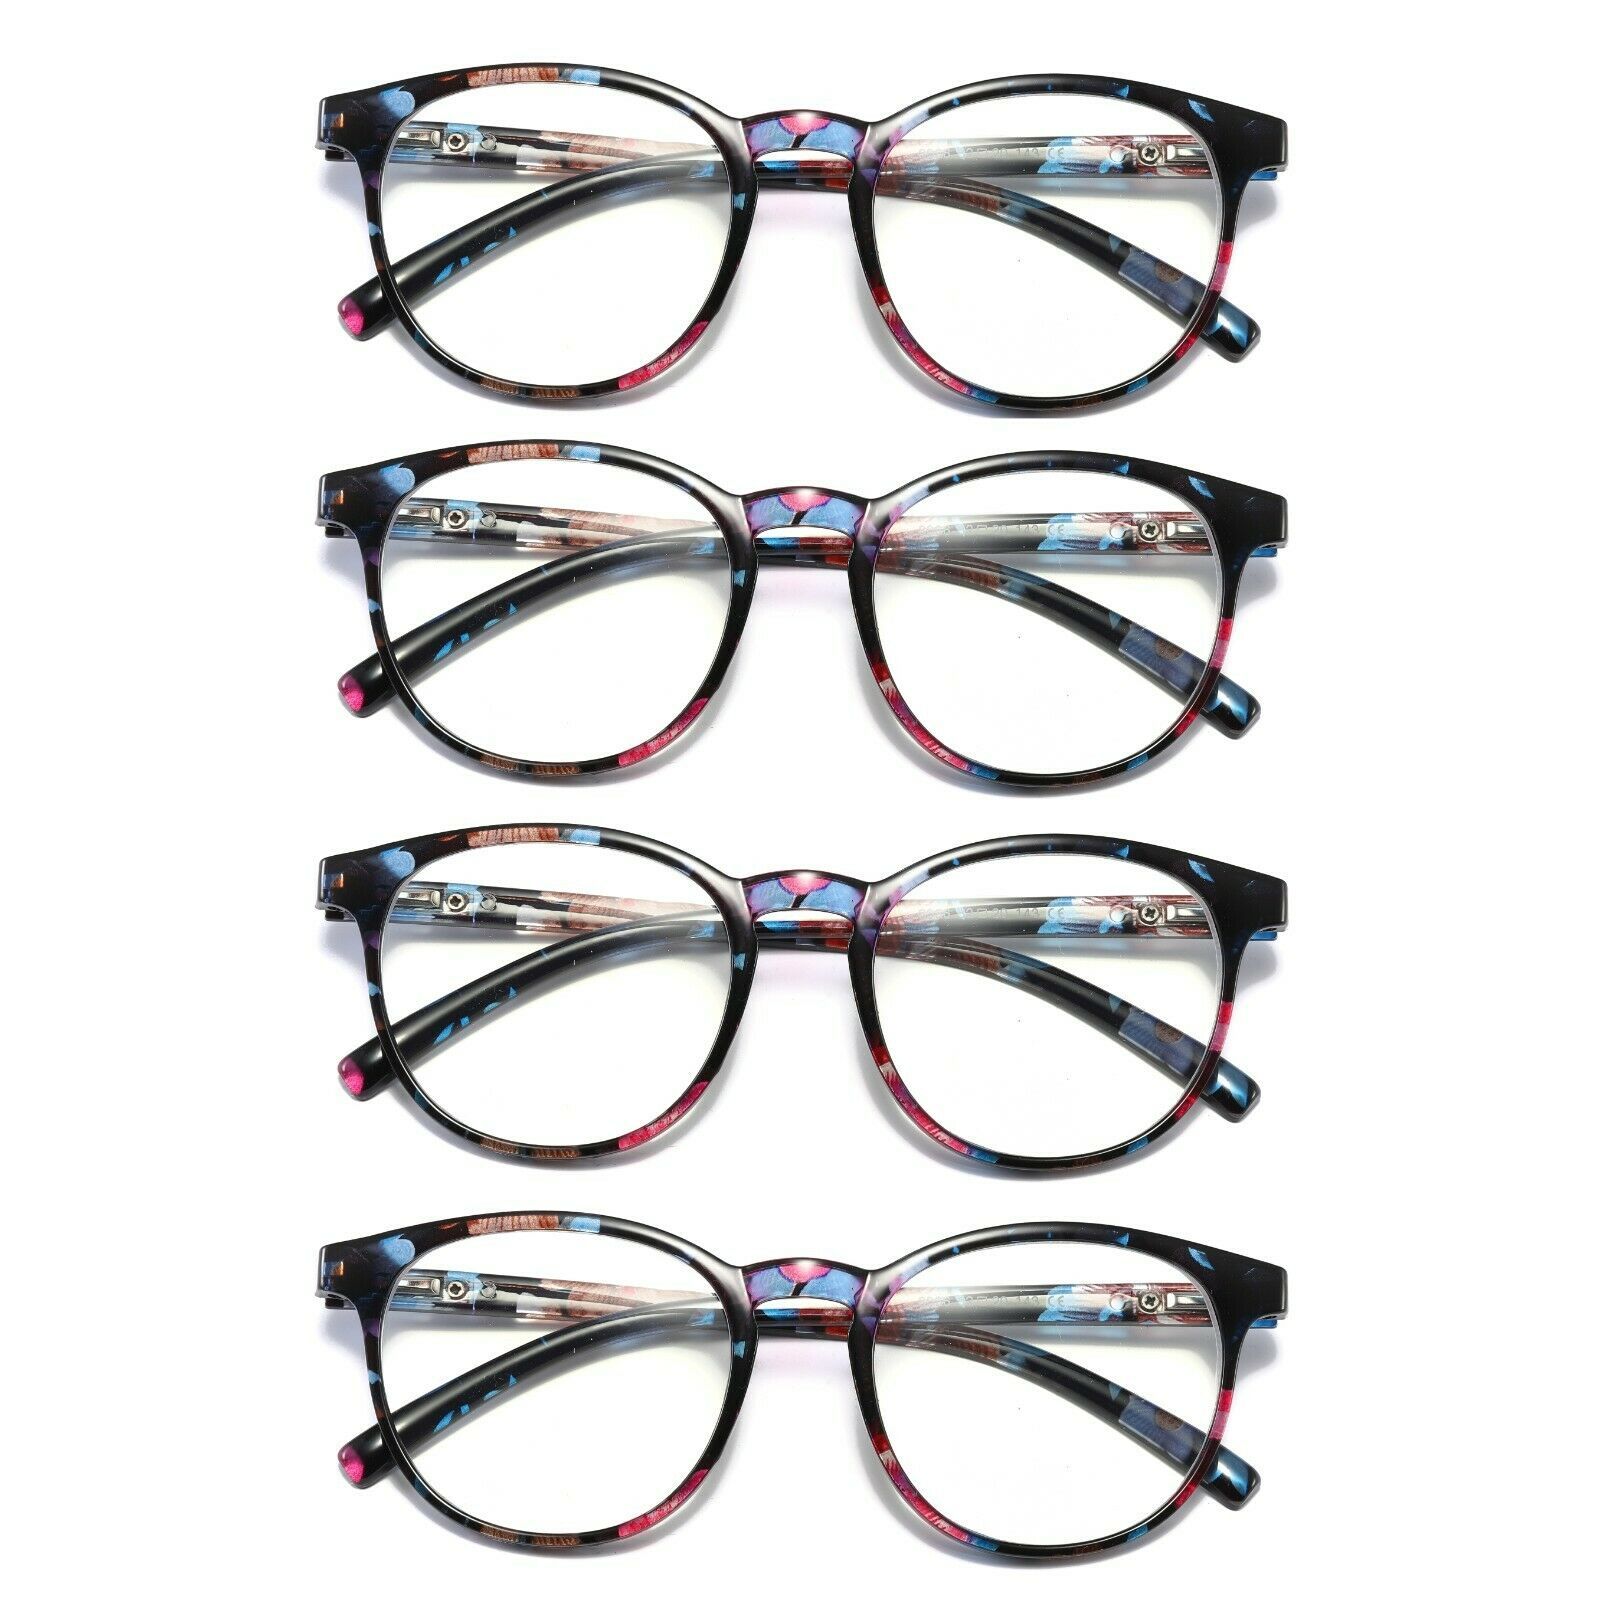 Primary image for 4 Pair Ladies Womens Round Big Frame Blue Light Blocking Reading Glasses Readers